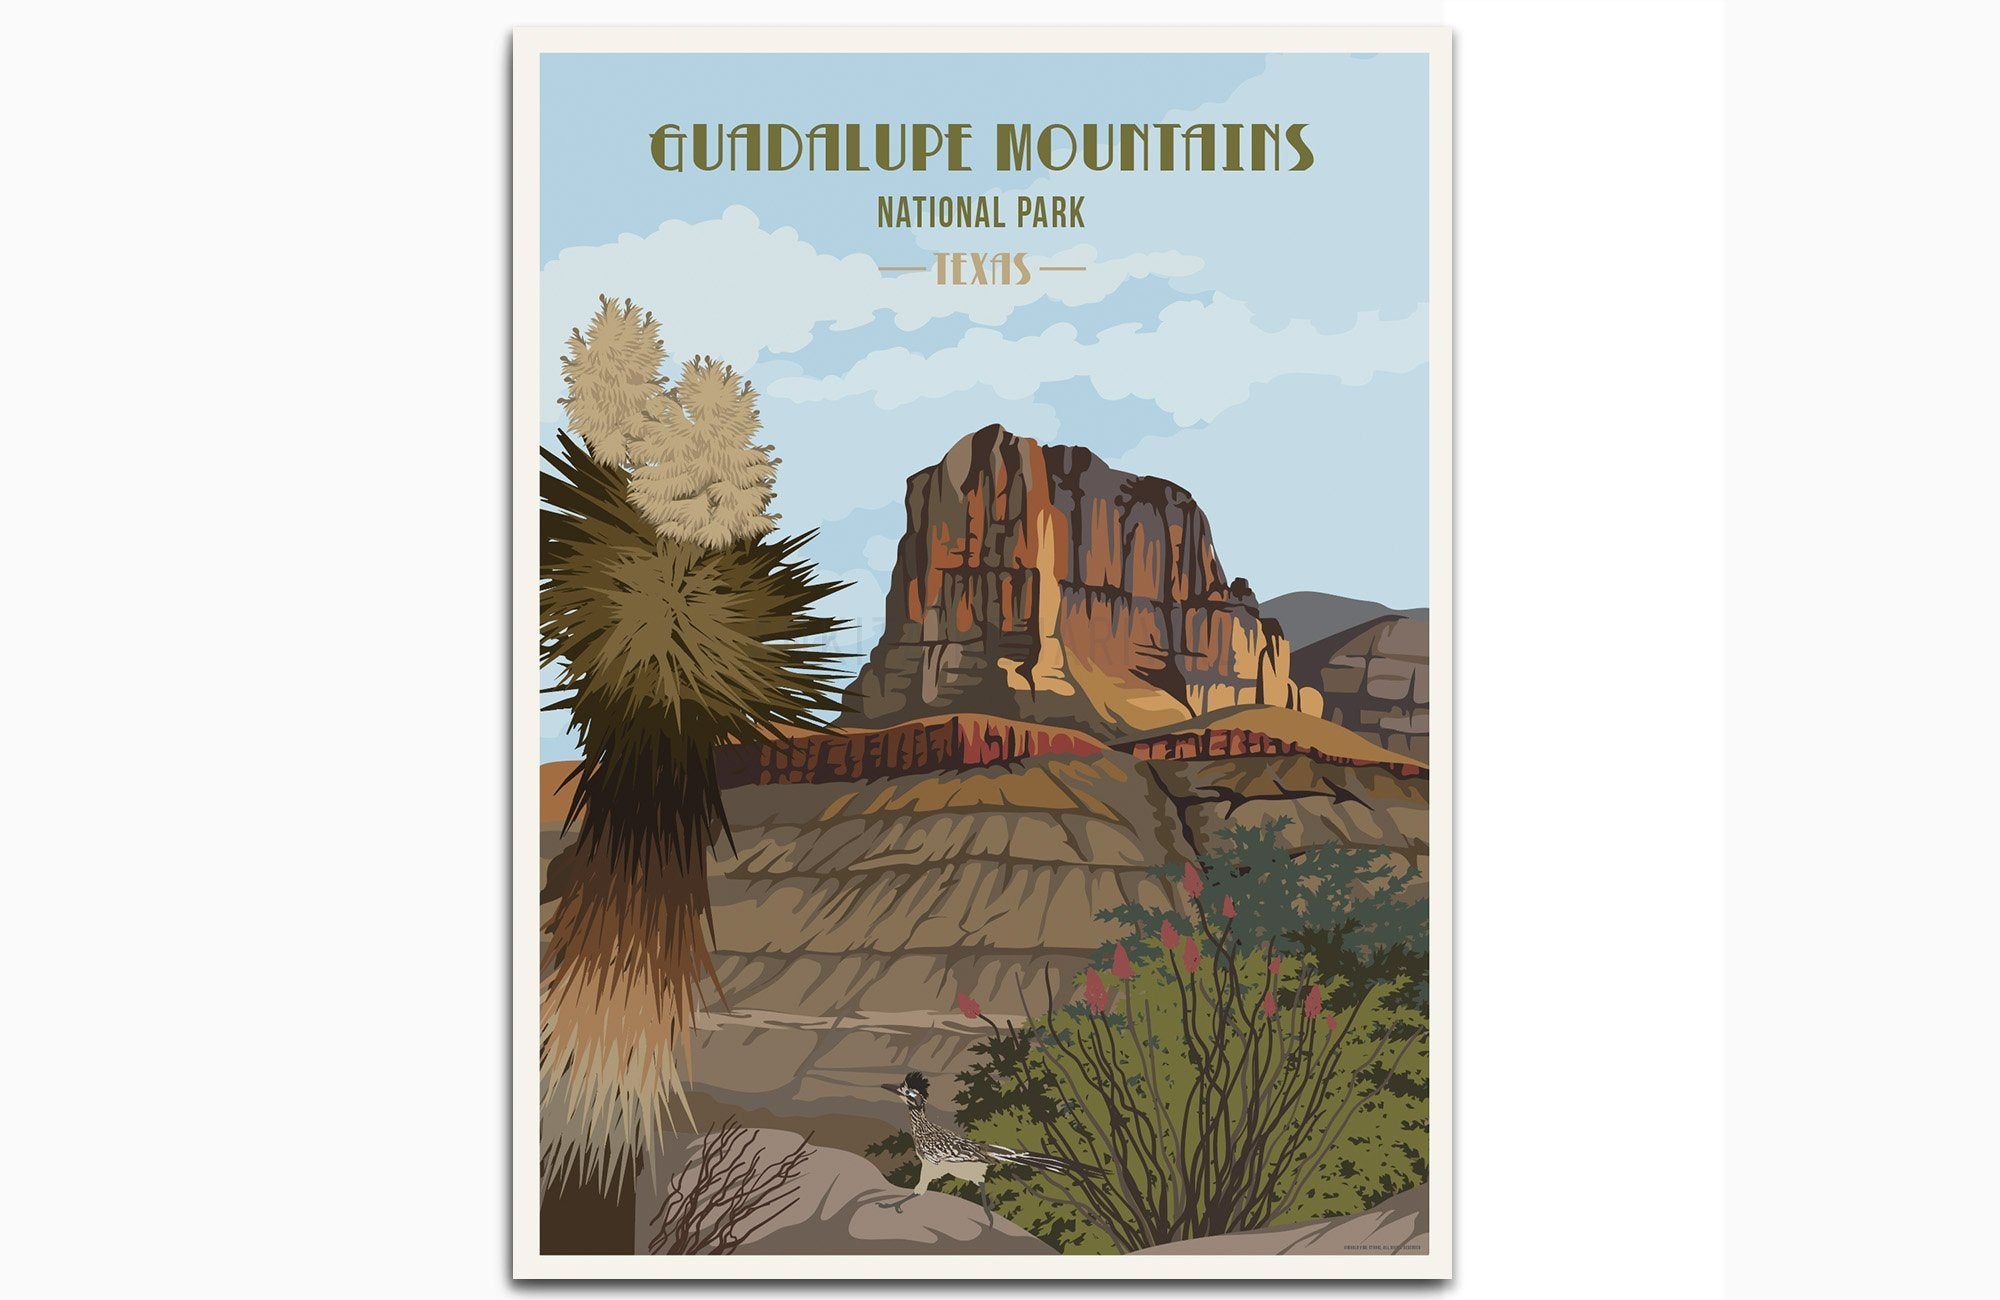 Guadalupe Mountains National Park, Texas, National Park Poster, Unframed Map World Vibe Studio 8X10 